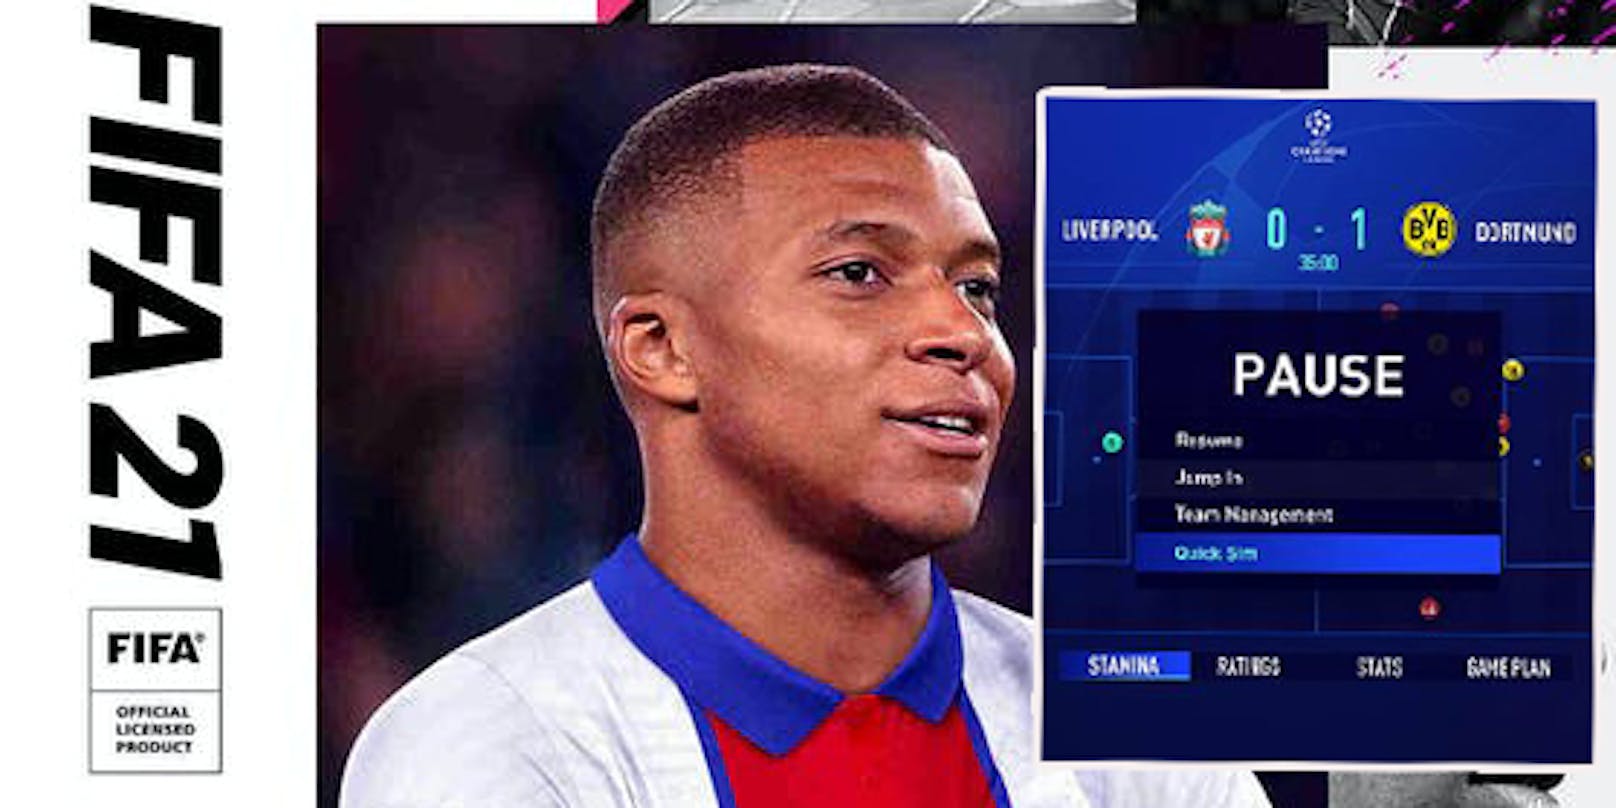 Kylian Mbappe lacht vom Cover von "FIFA 21".